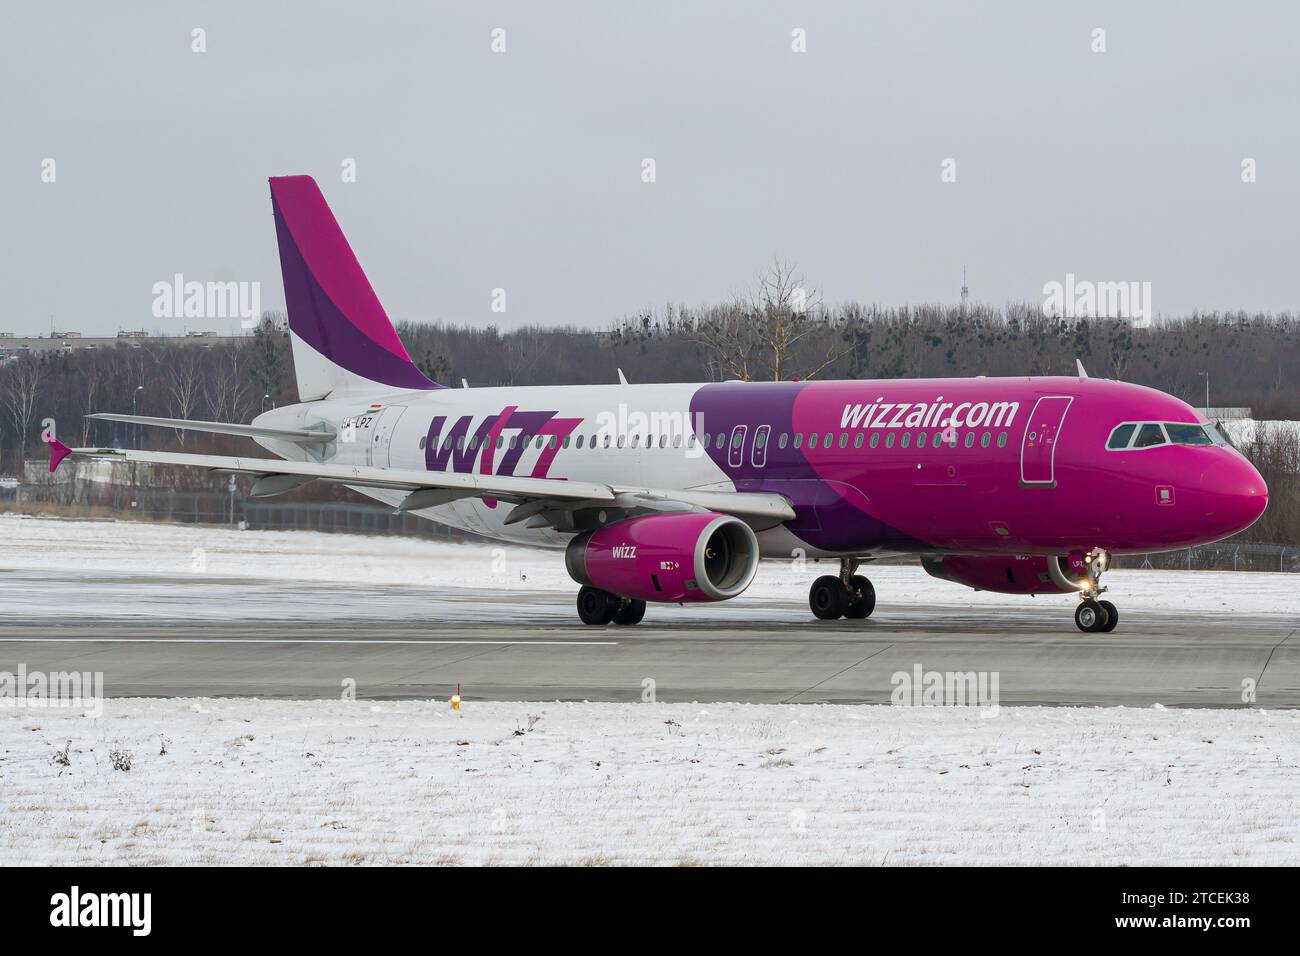 Hungarian low-cost airline's WizzAir Airbus A320 taxiing for takeoff from snowy Lviv Stock Photo